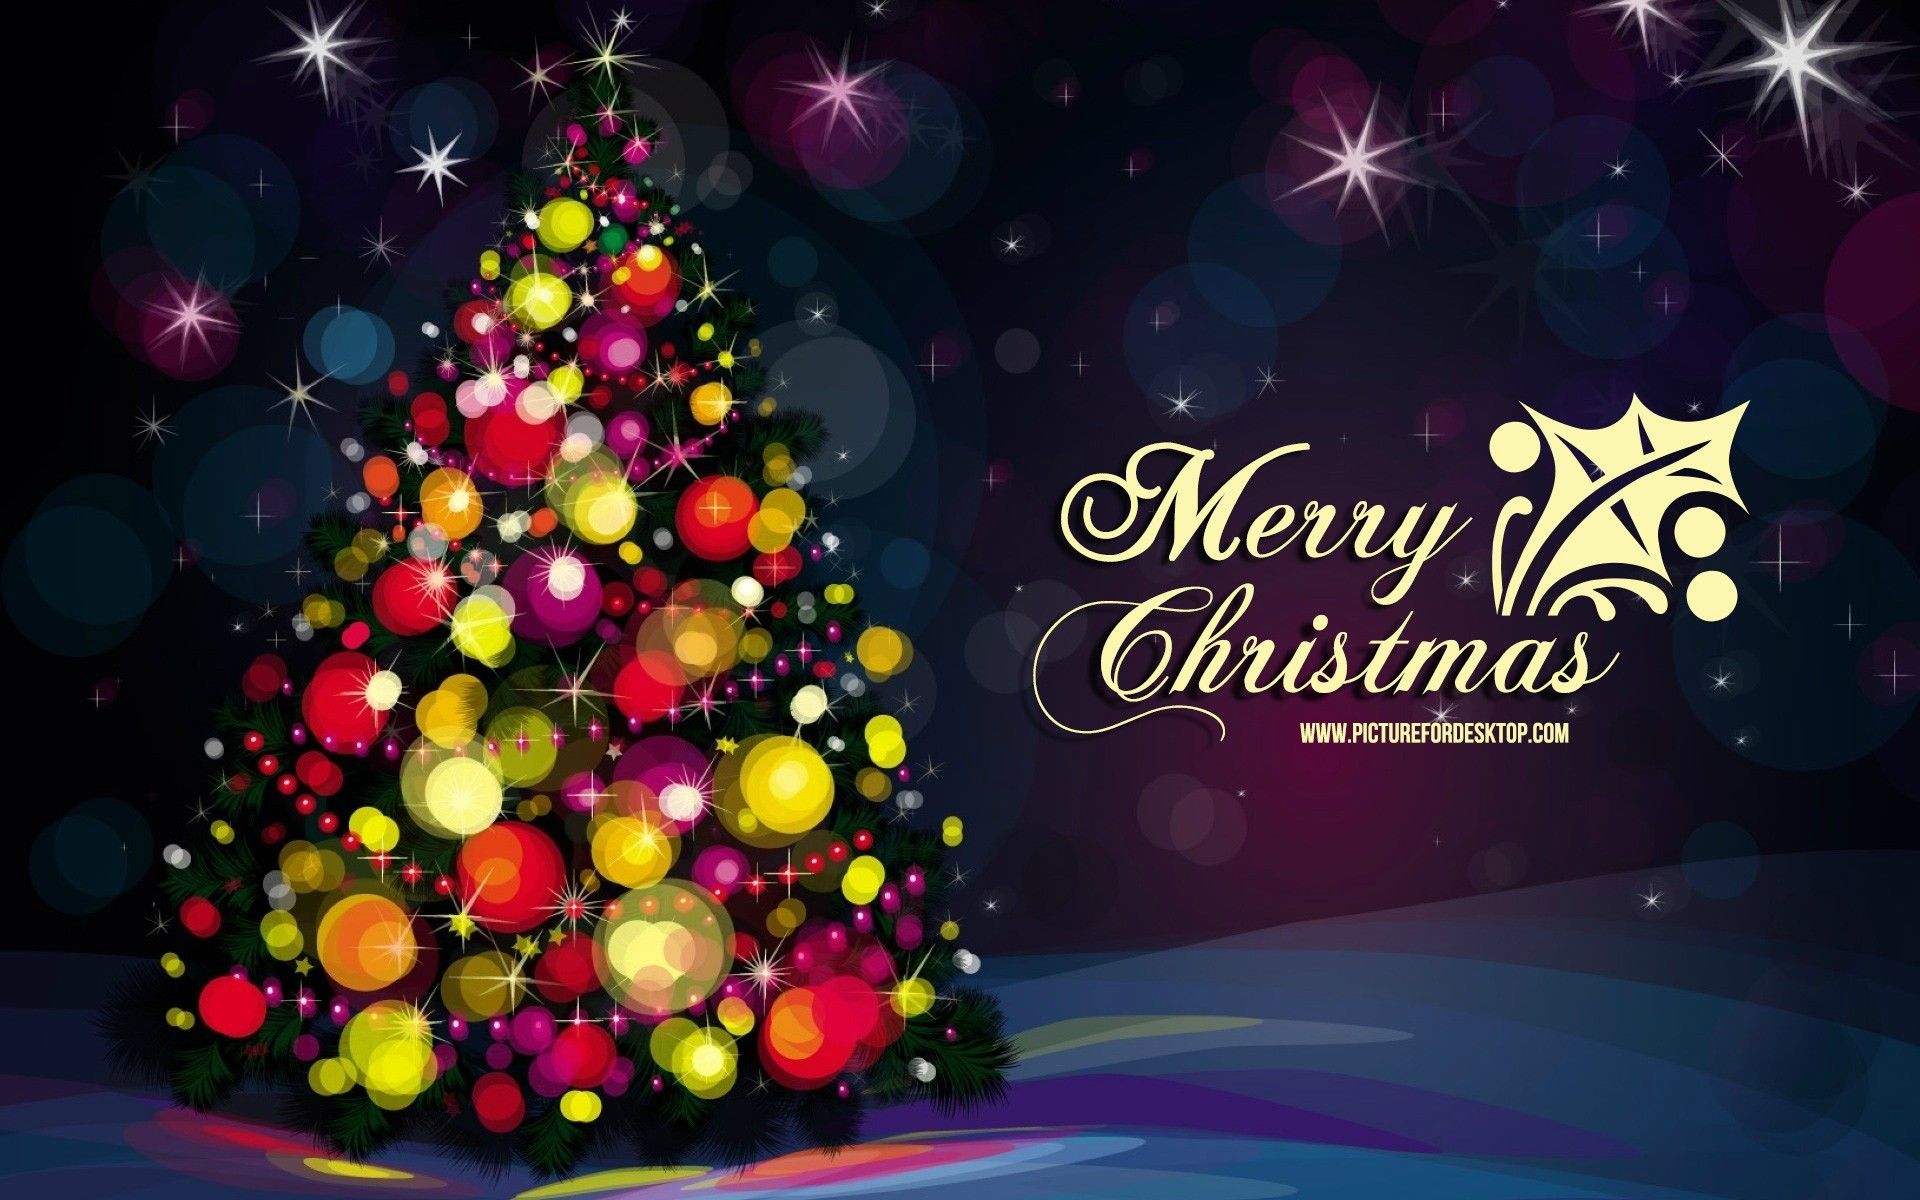 Merry Christmas wallpaper Best Christmas HD Wallpapers for